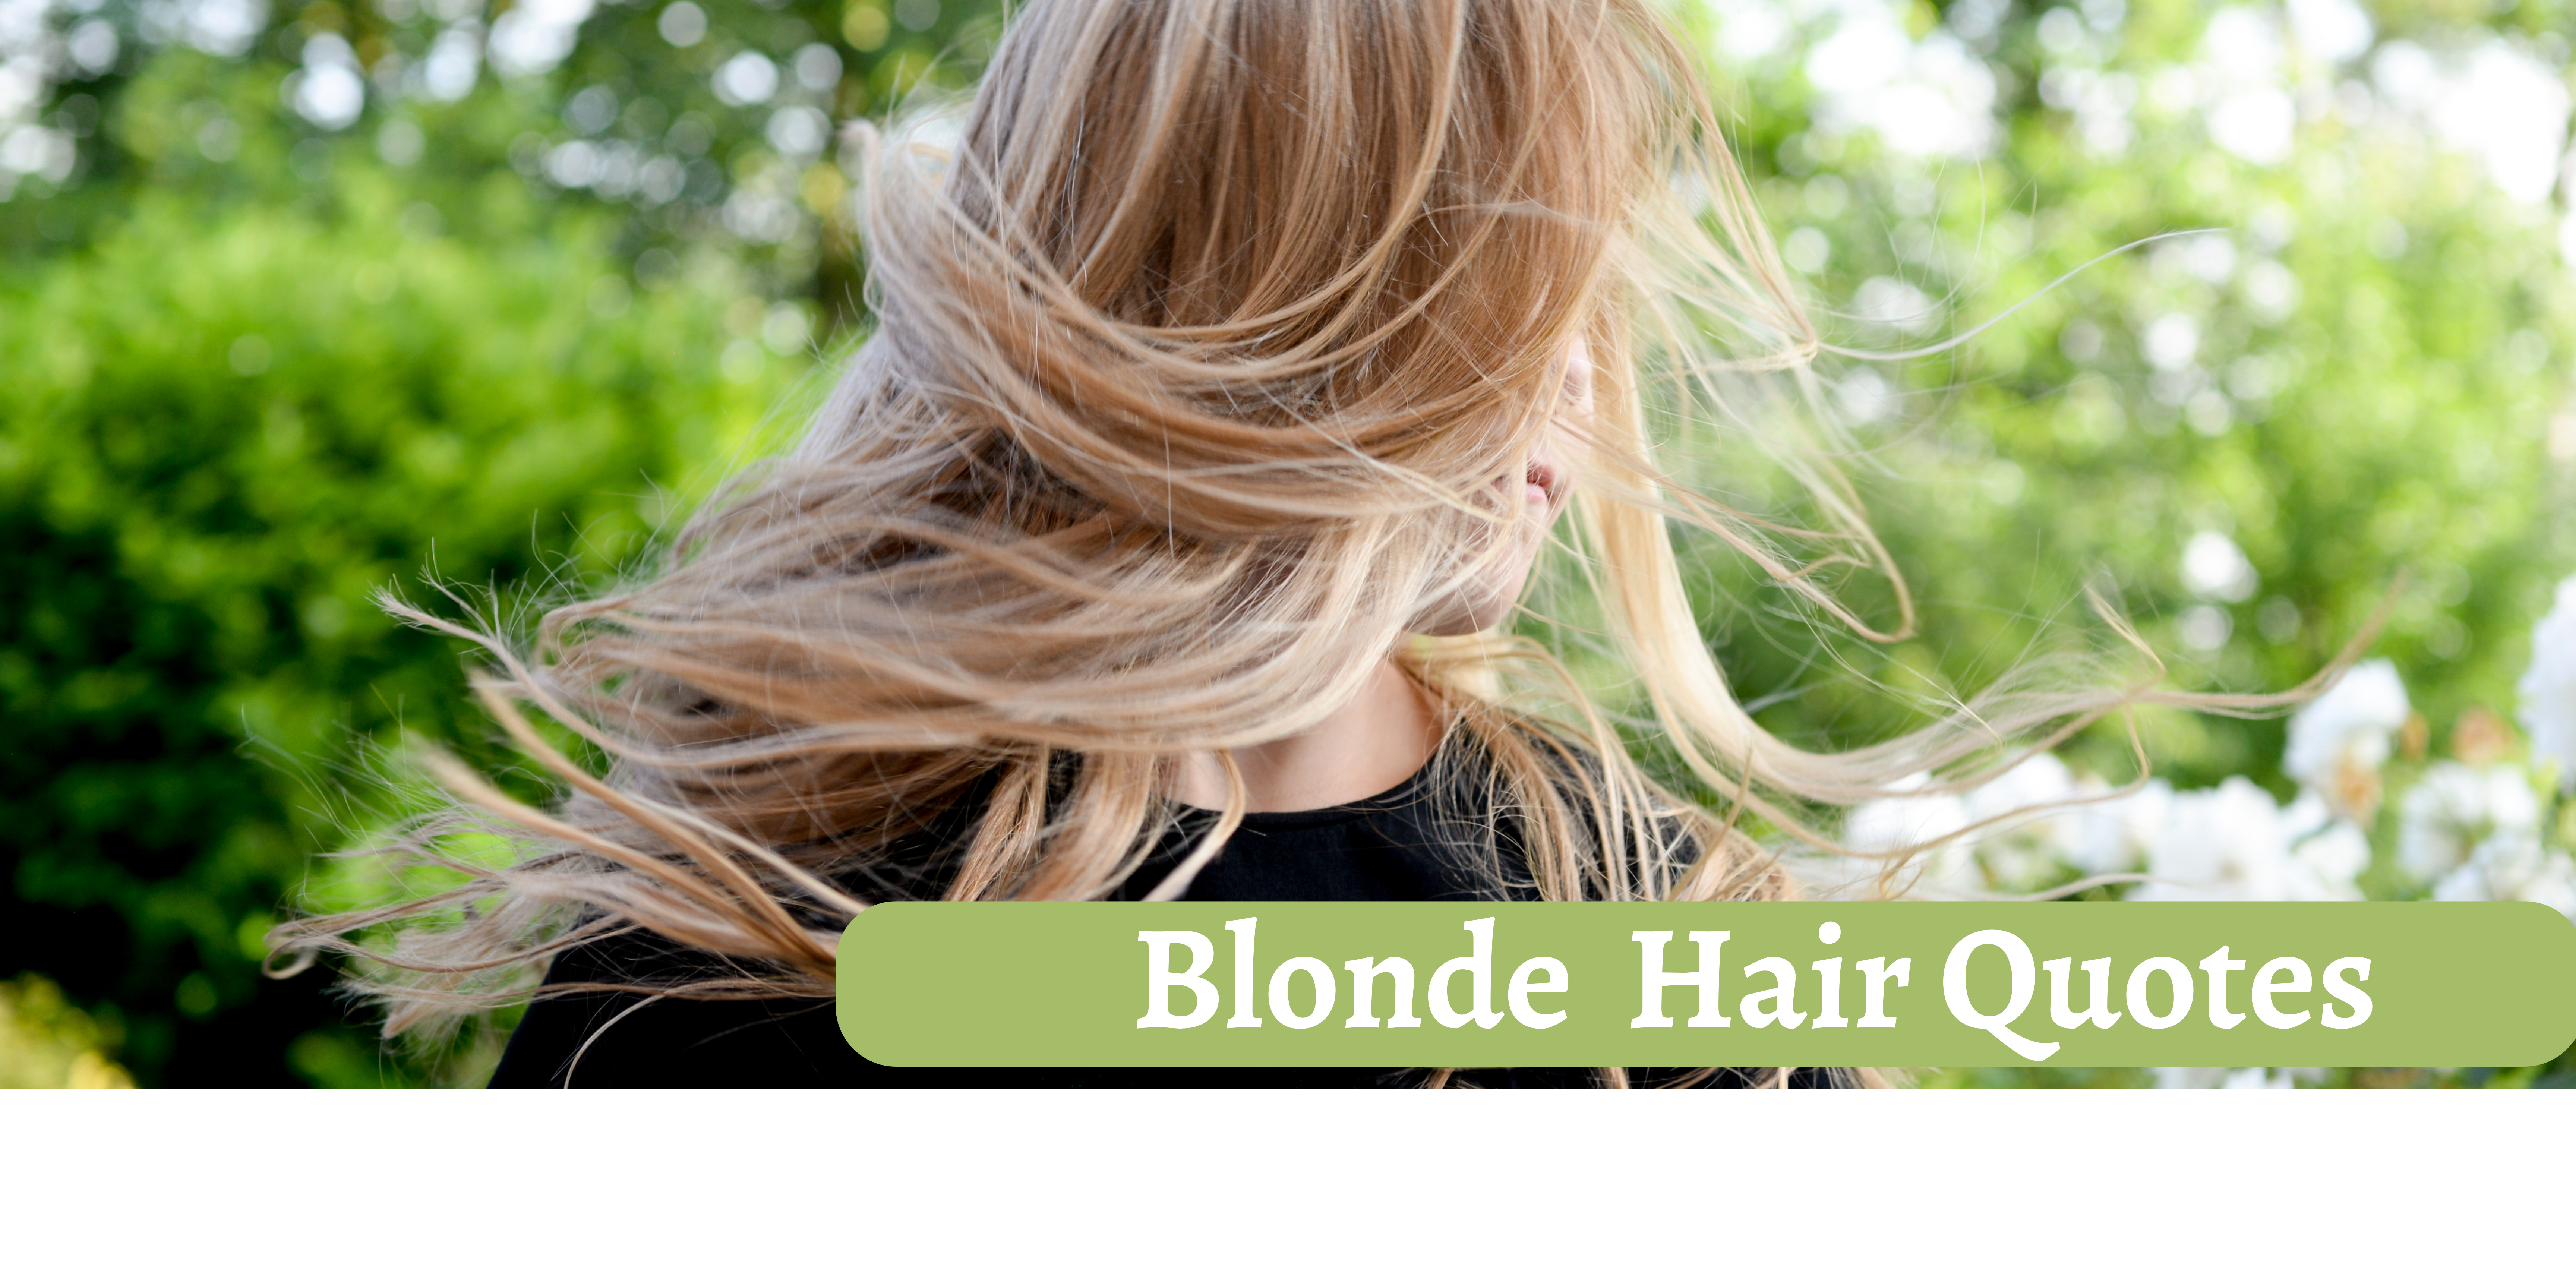 Blonde Hair Quotes